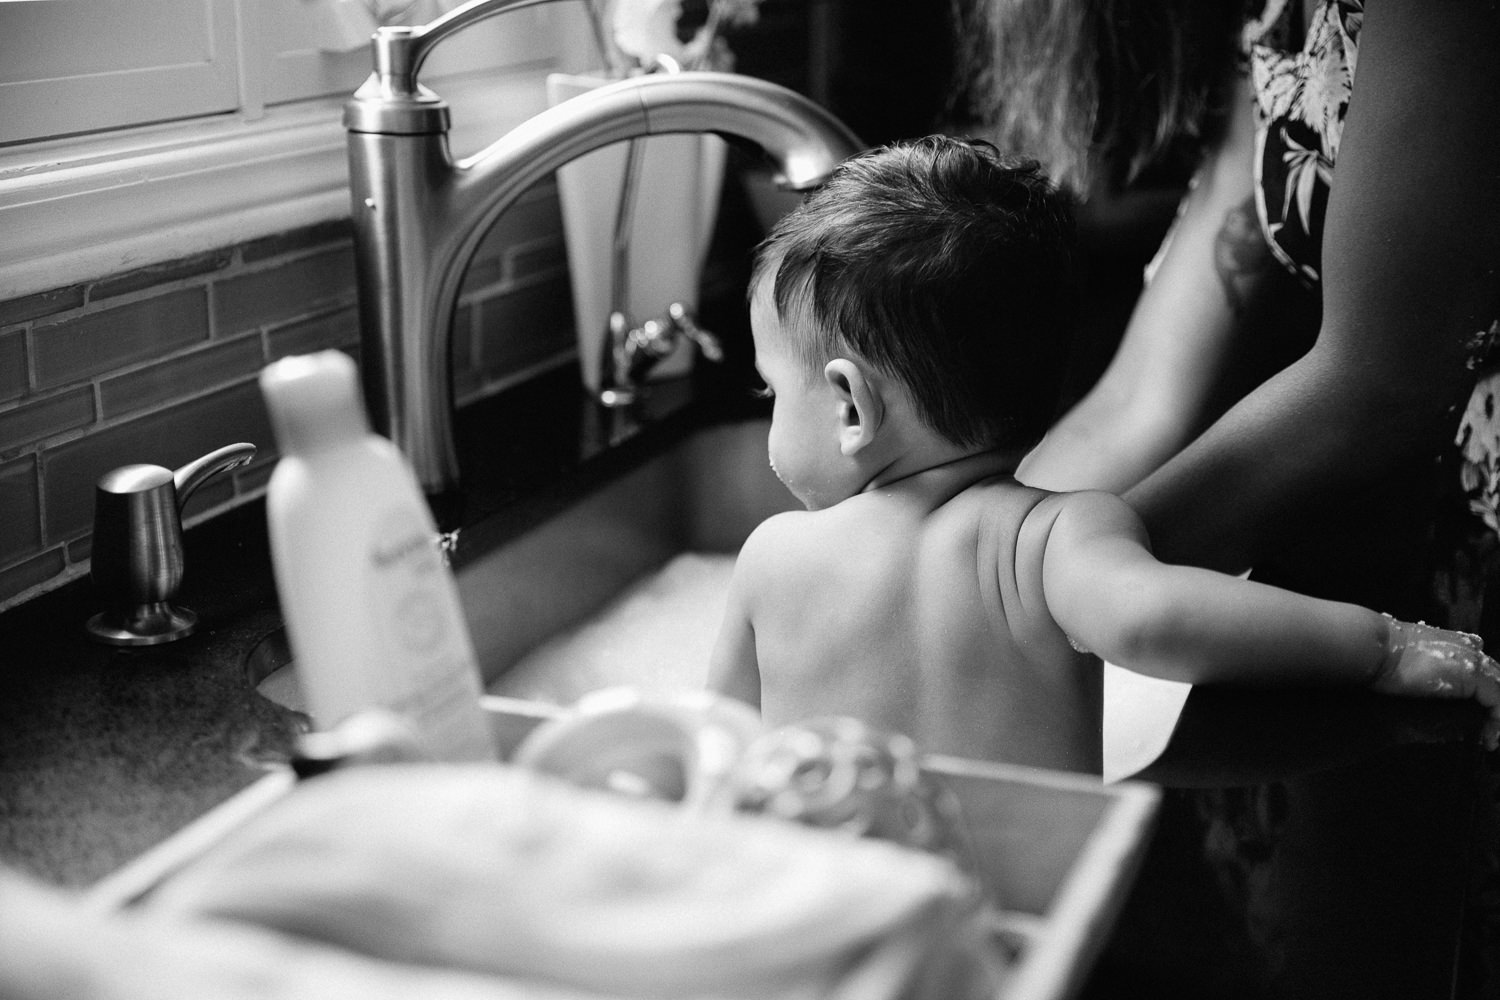 1 year old baby boy with dark hair sitting in kitchen sink as mom gives him a bath, back to camera - York Region In-Home Photography